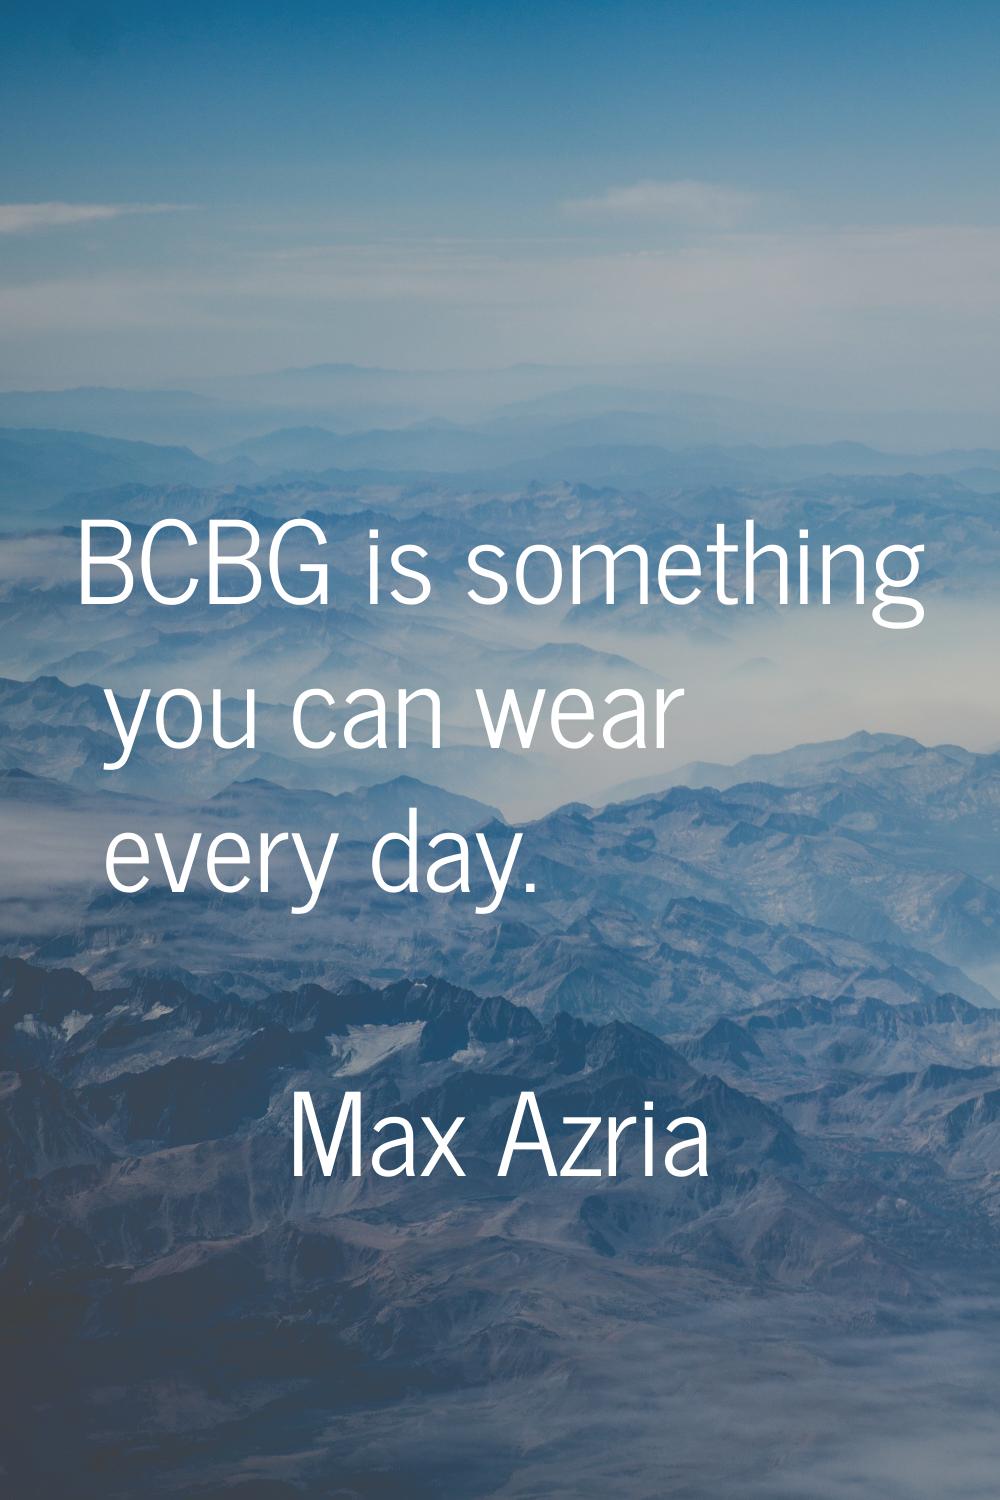 BCBG is something you can wear every day.